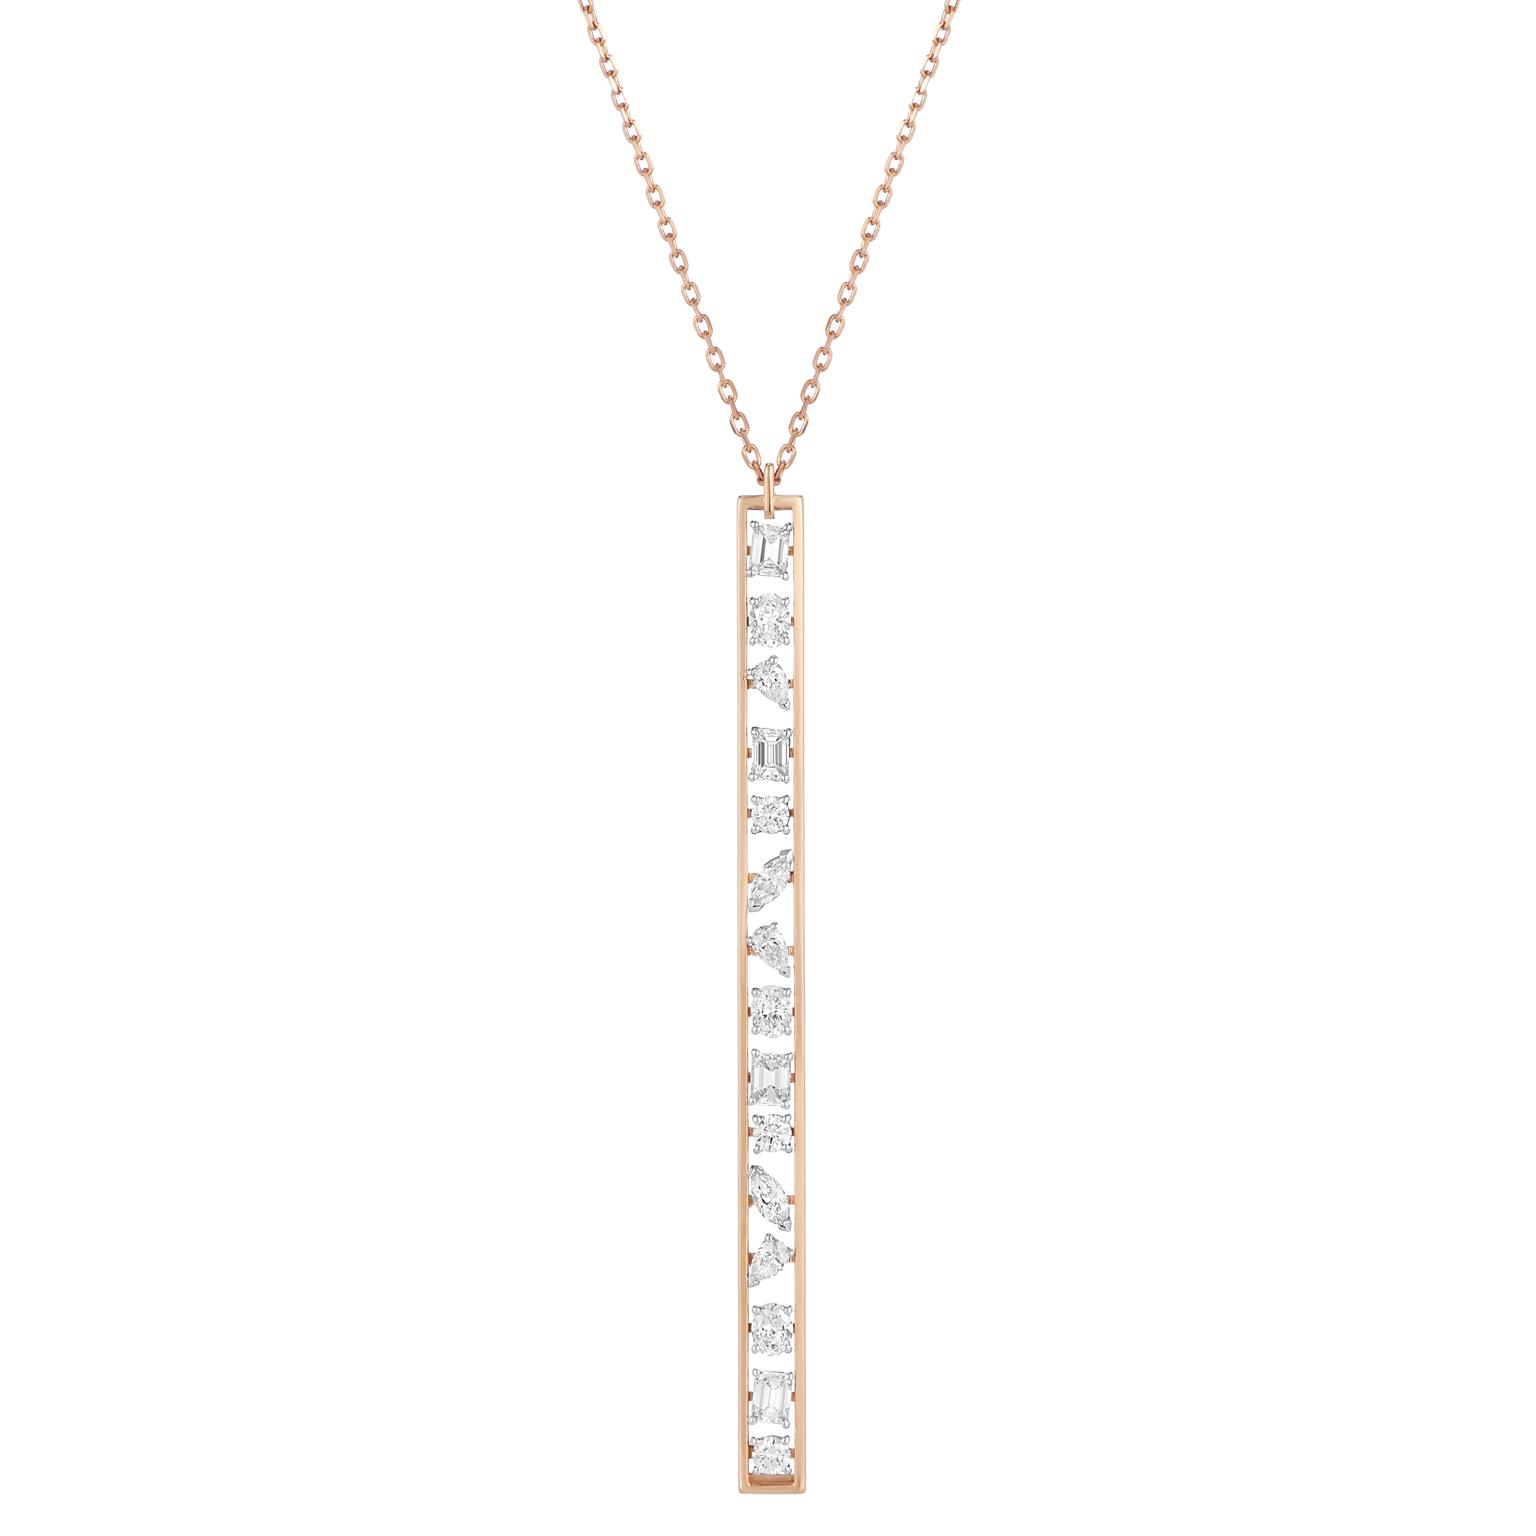 Nour By Jahan - Pendant from the Jolie Collection